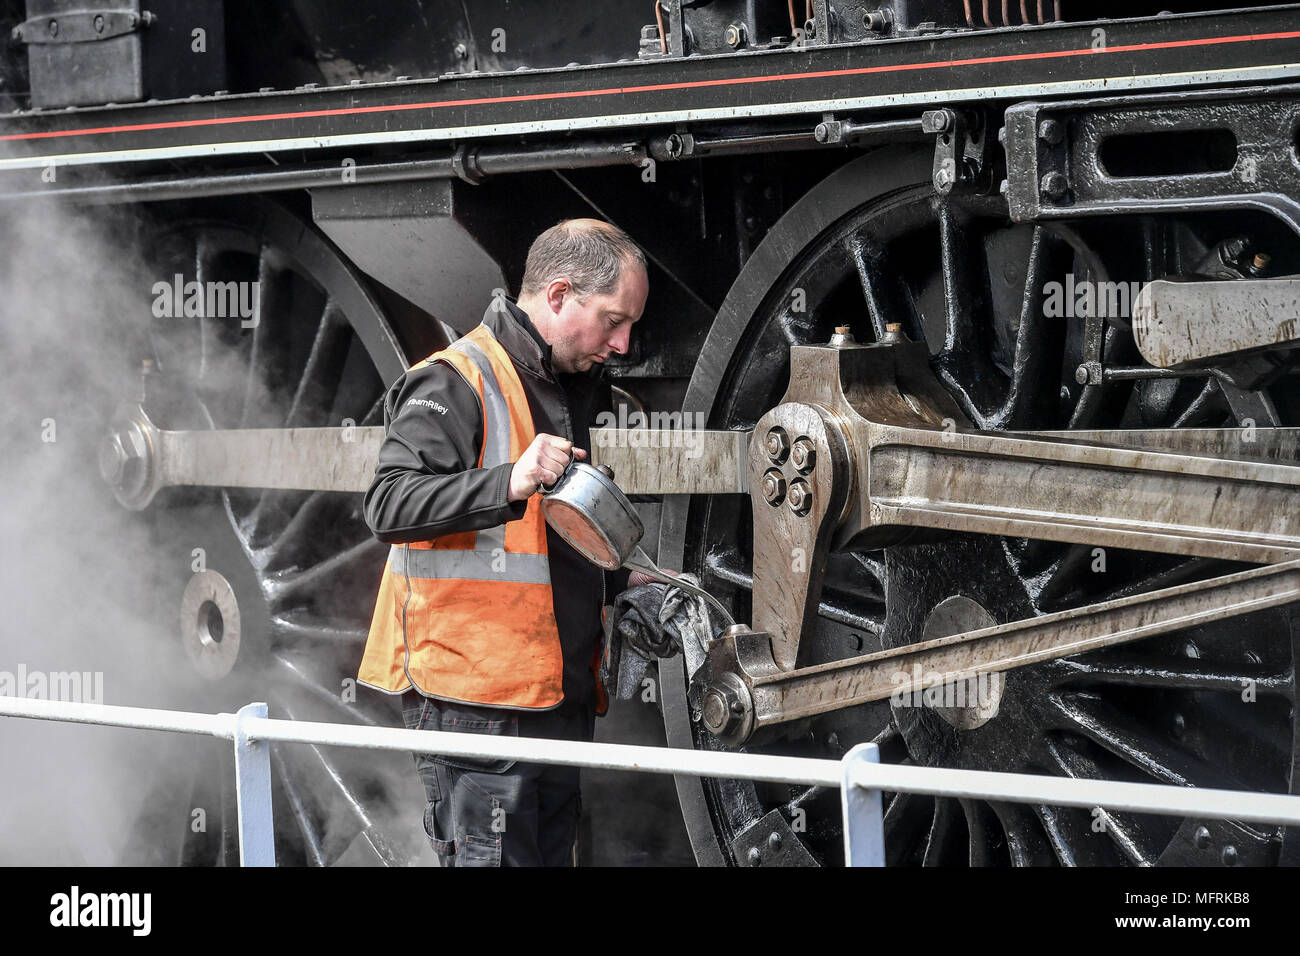 An engineer oils the wheel gear on steam Locomotive 45212 ROY 'CORKY' BROWN Stanier Black Five, Class 5MT 4-6-0, as it's turned around on a huge turntable at Yeovil Junction, where it pulled in during its leg of the Great Britain XI steam train tour, from Cardiff to Swanage via Dorchester. PRESS ASSOCIATION Photo. Picture date: Thursday April, 26, 2018. Photo credit should read: Ben Birchall/PA Wire it's turned around on a huge turntable at Yeovil Junction, where it pulls in during the leg from Cardiff to Swanage via Dorchester on the Great Britain XI steam train tour across the UK. PRESS ASSO Stock Photo